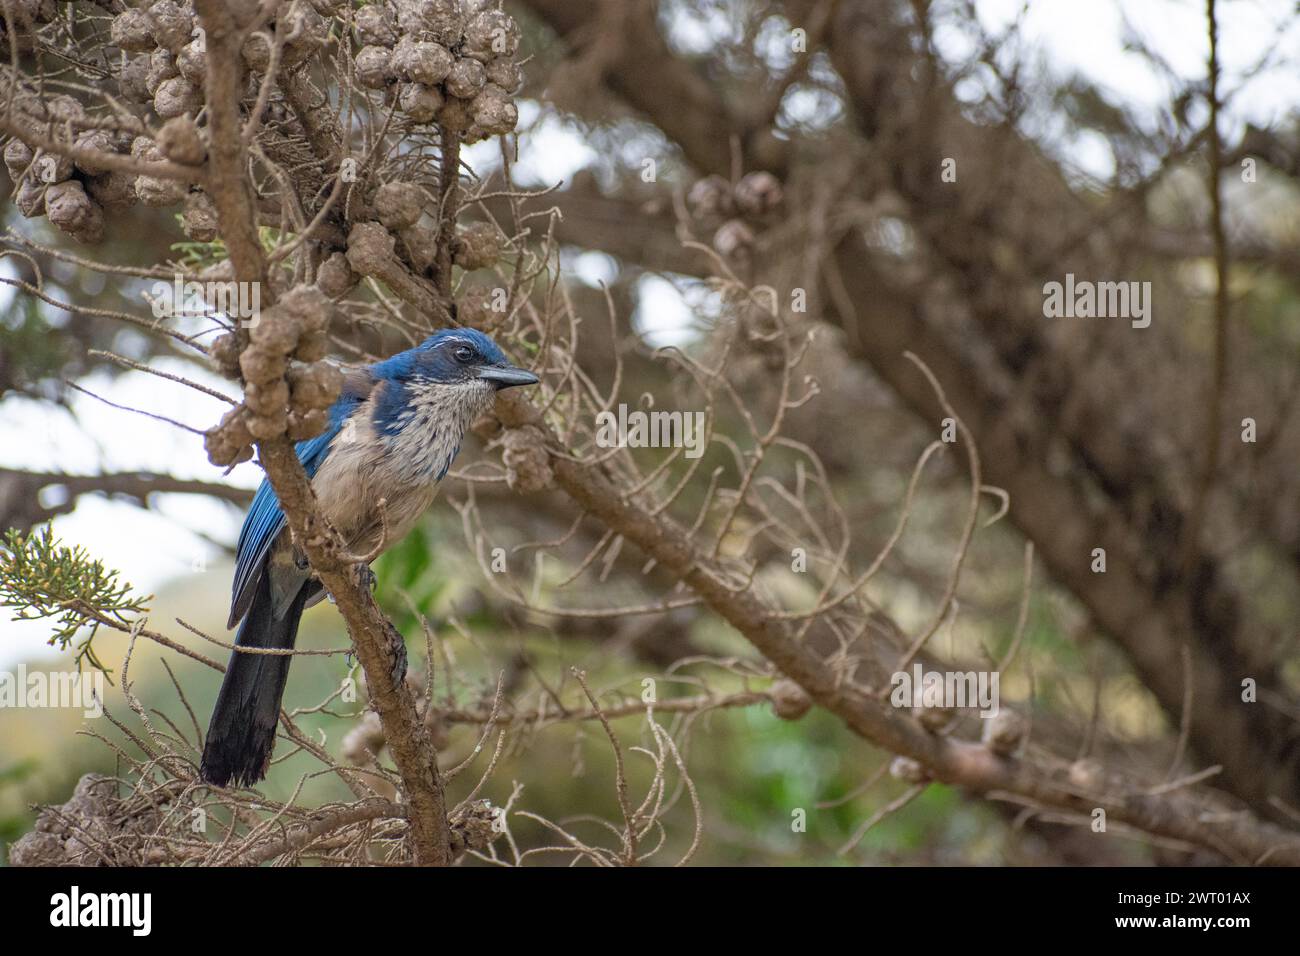 A blue colored bird, the Aphelocoma insularis, or Island Scrub-Jay, perched on a tree branch on Santa Cruz Island, Channel Islands National Park Stock Photo